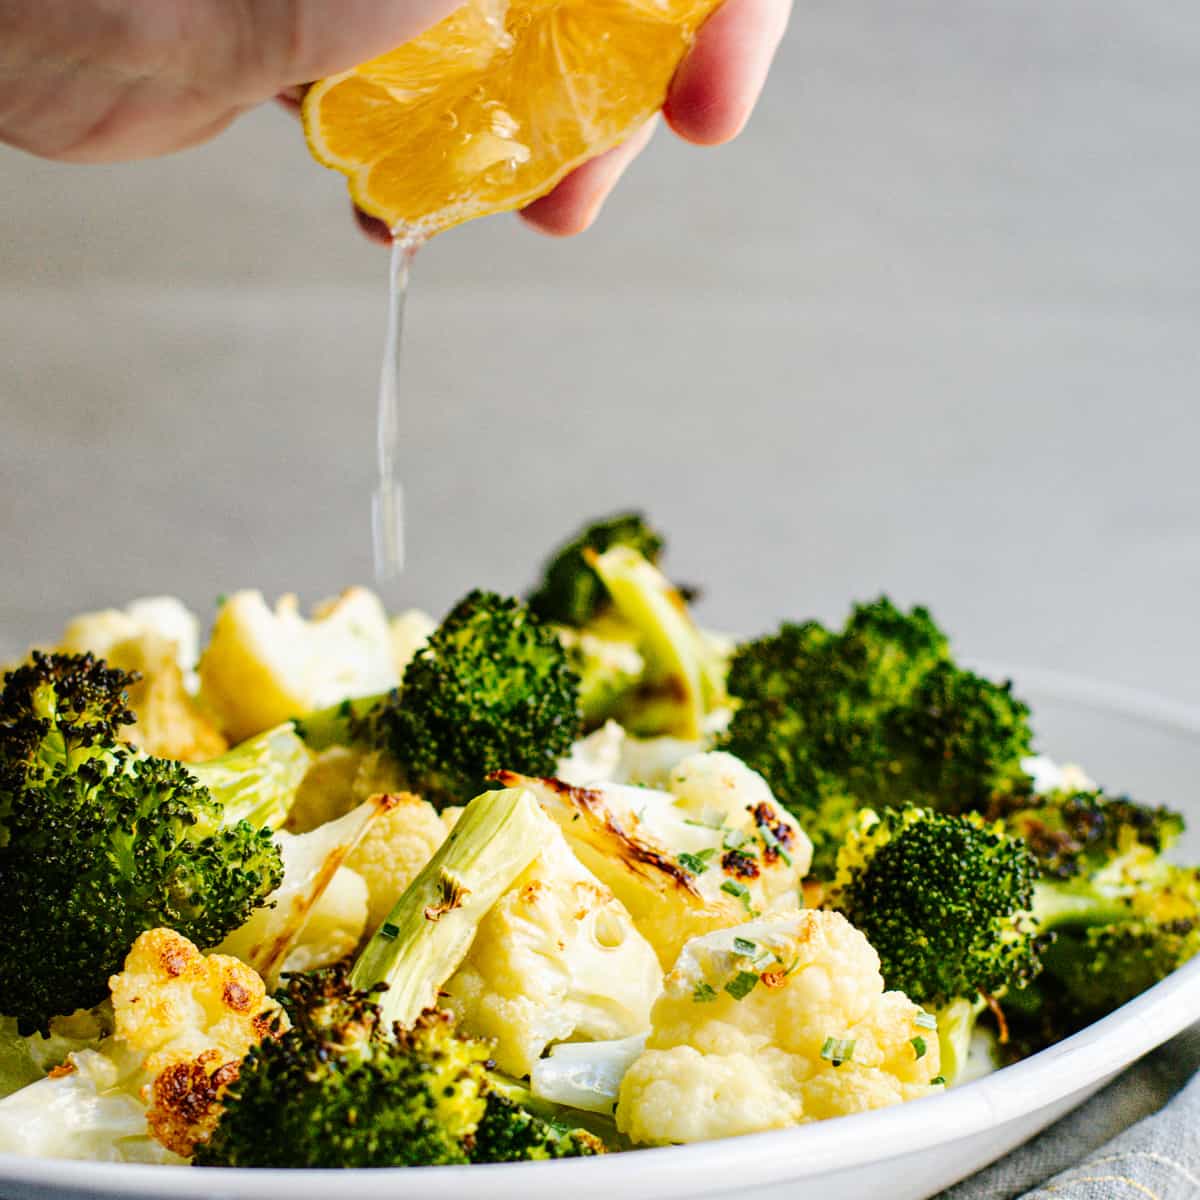 A person is squeezing an orange over a plate of broccoli and cauliflower.